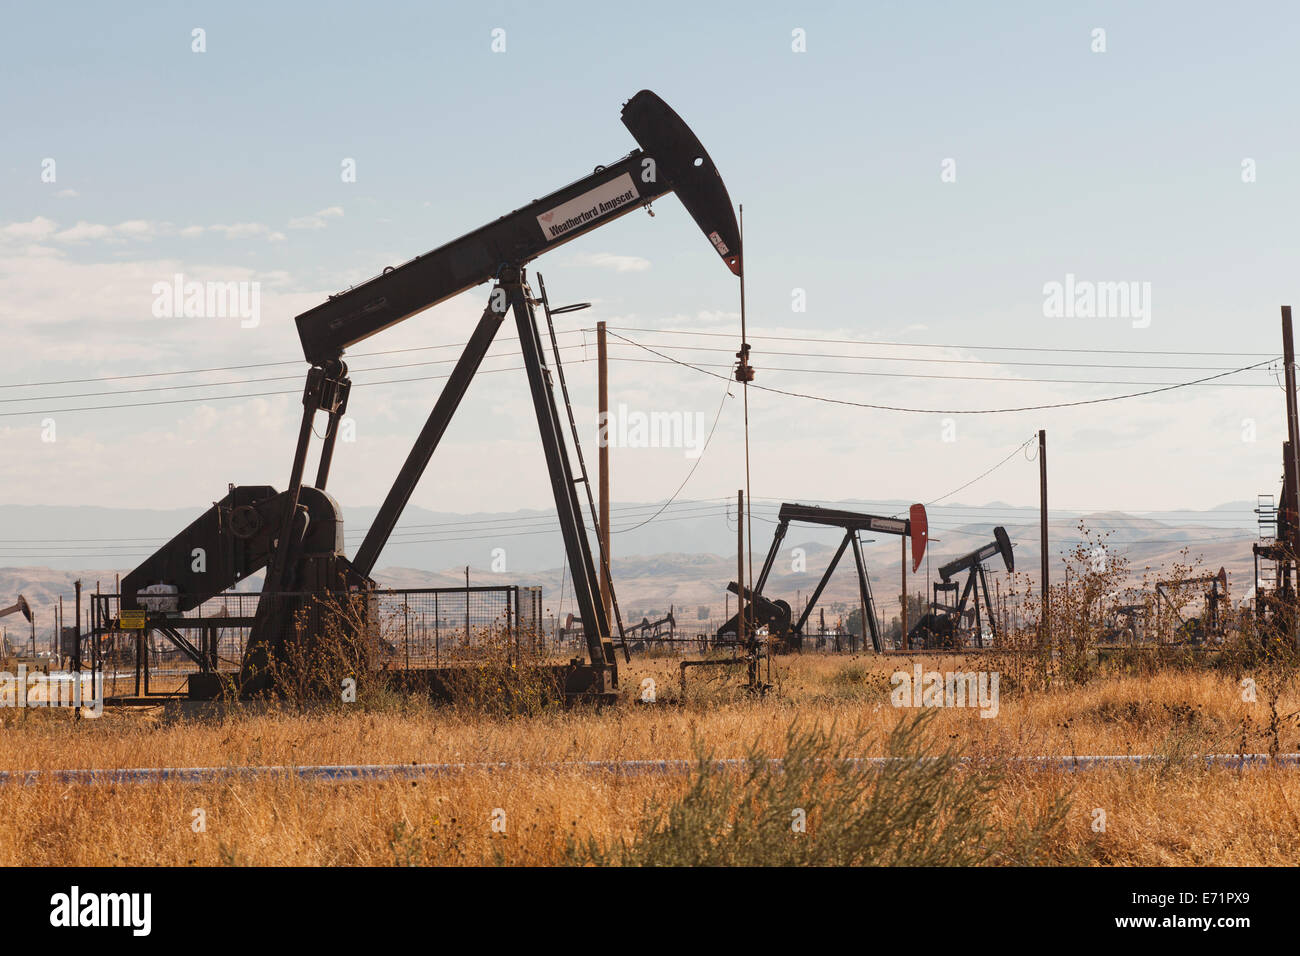 Chevalets huile - Kern River Oil Field, Coalinga, California USA Banque D'Images